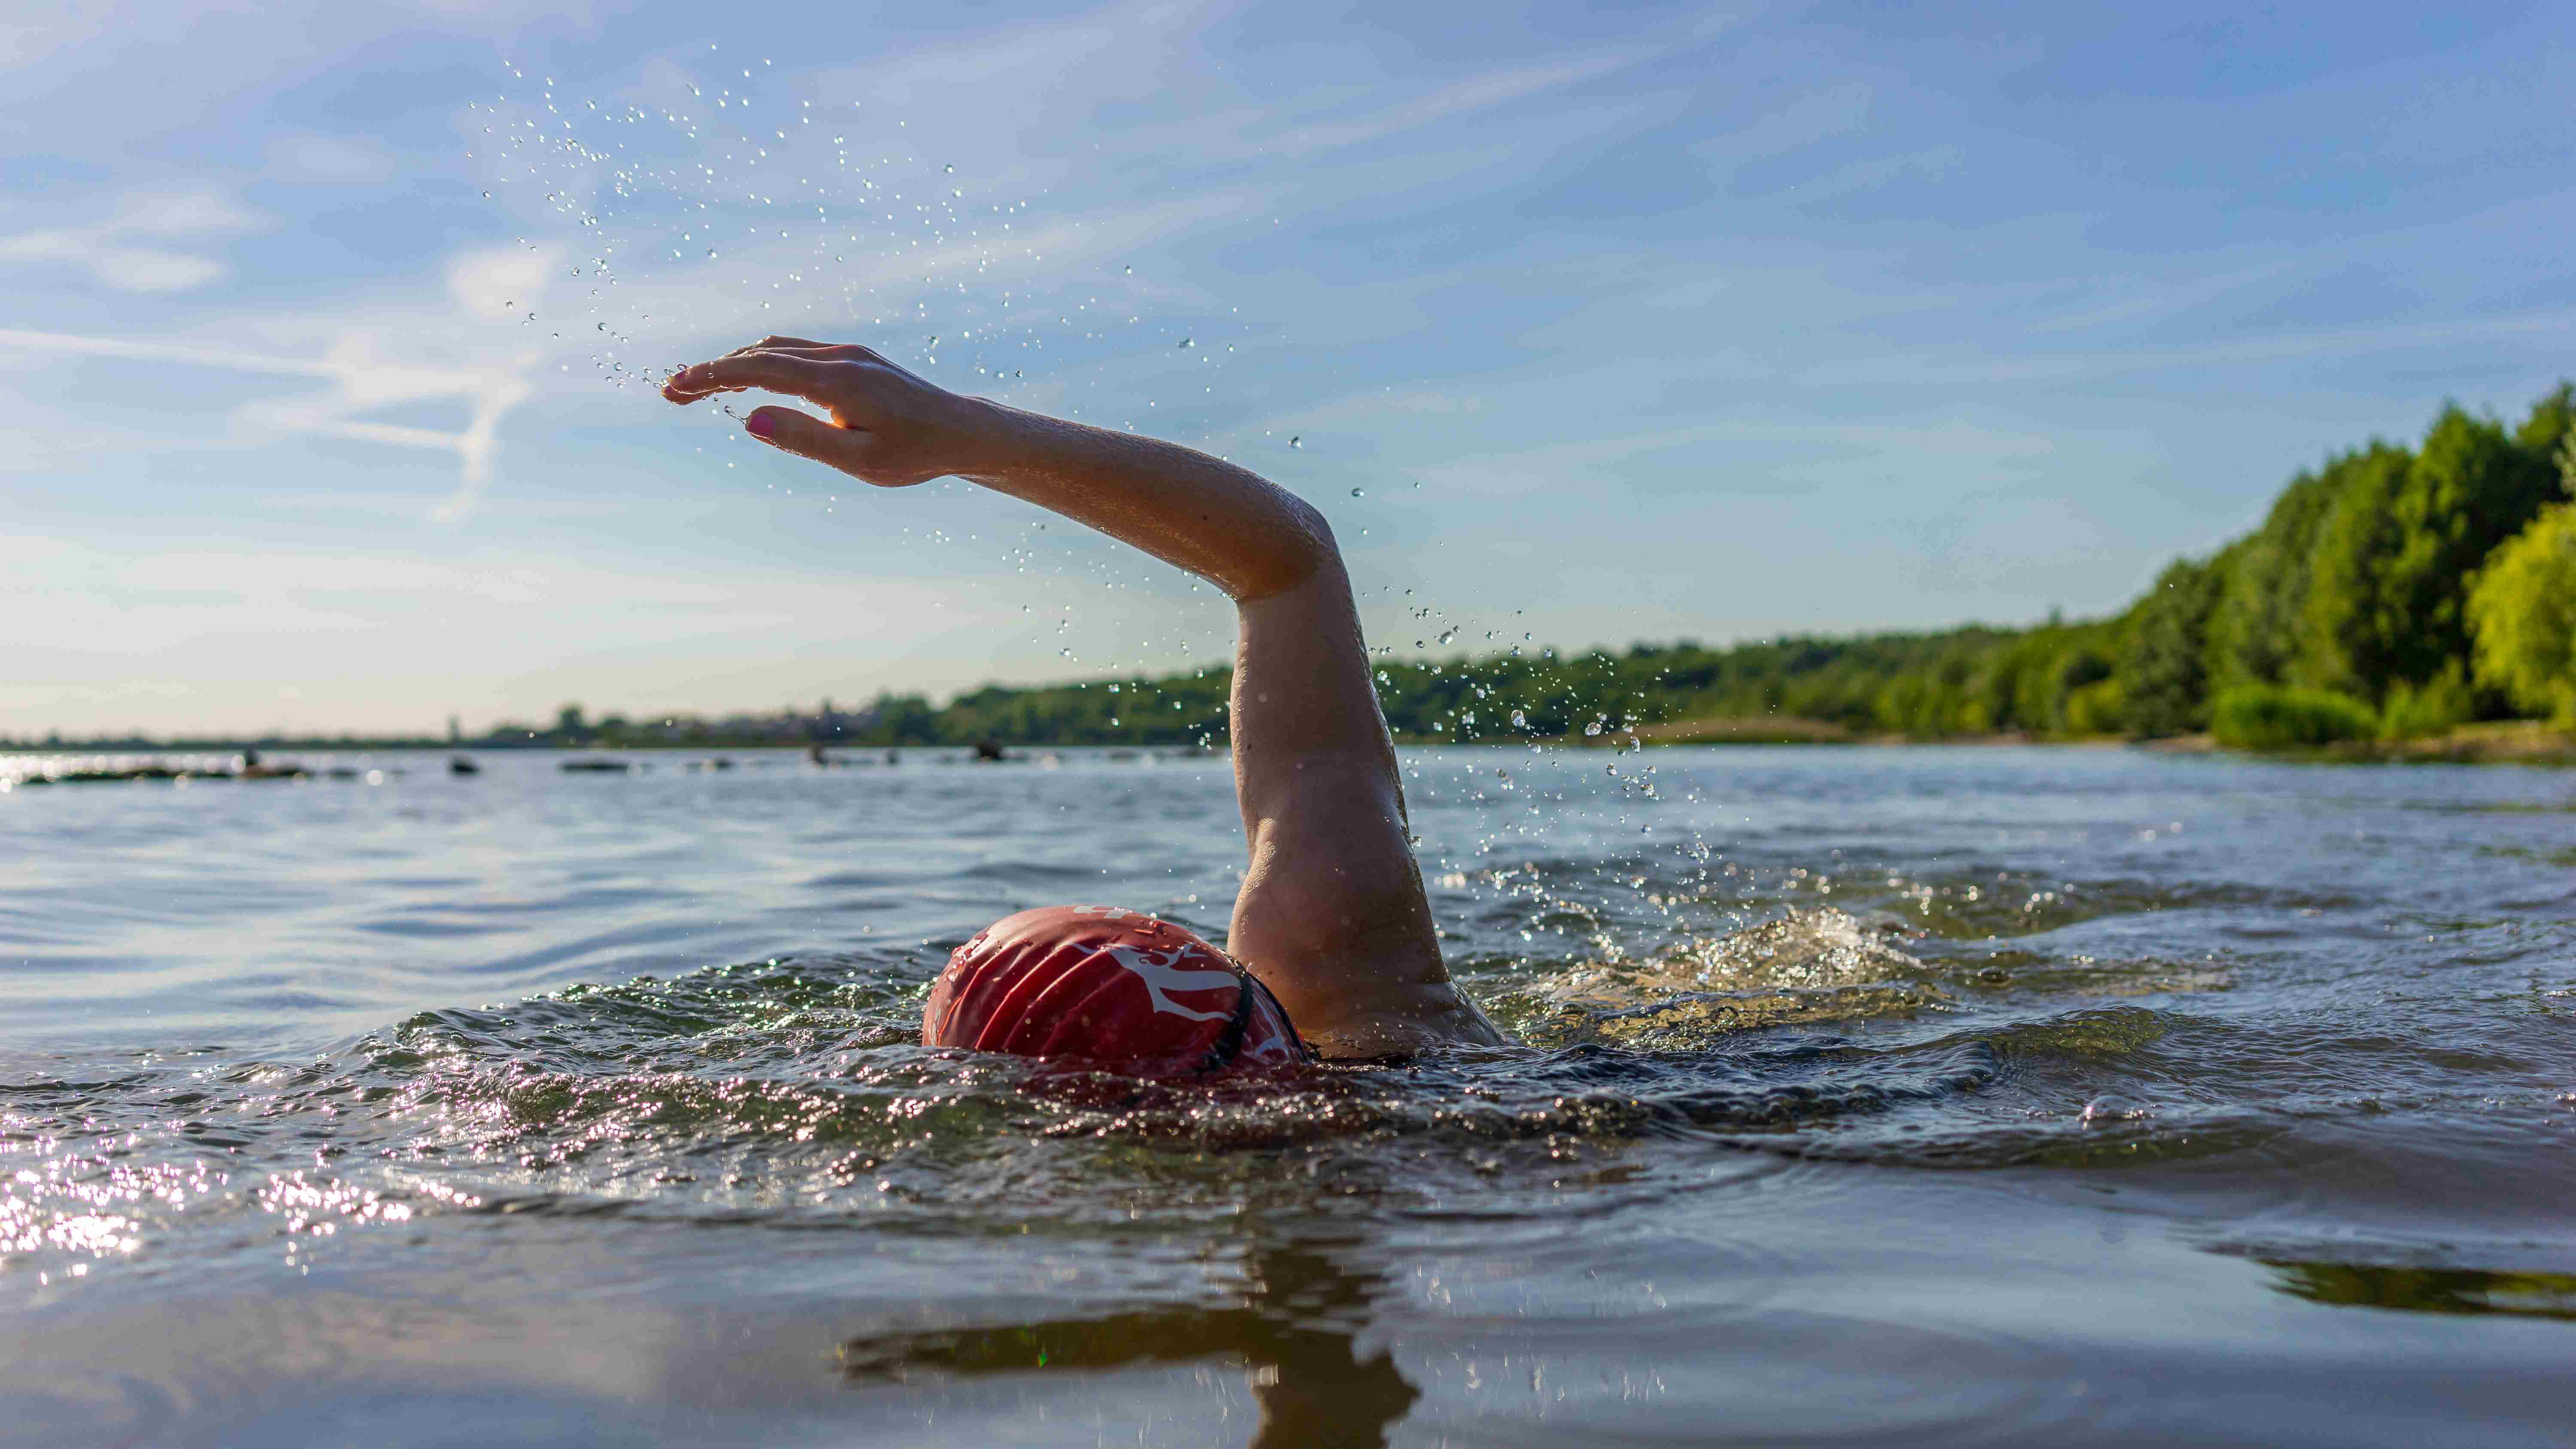 Person's head in swimming cap and arm raised as swimming a stroke. In lake with trees in the background.